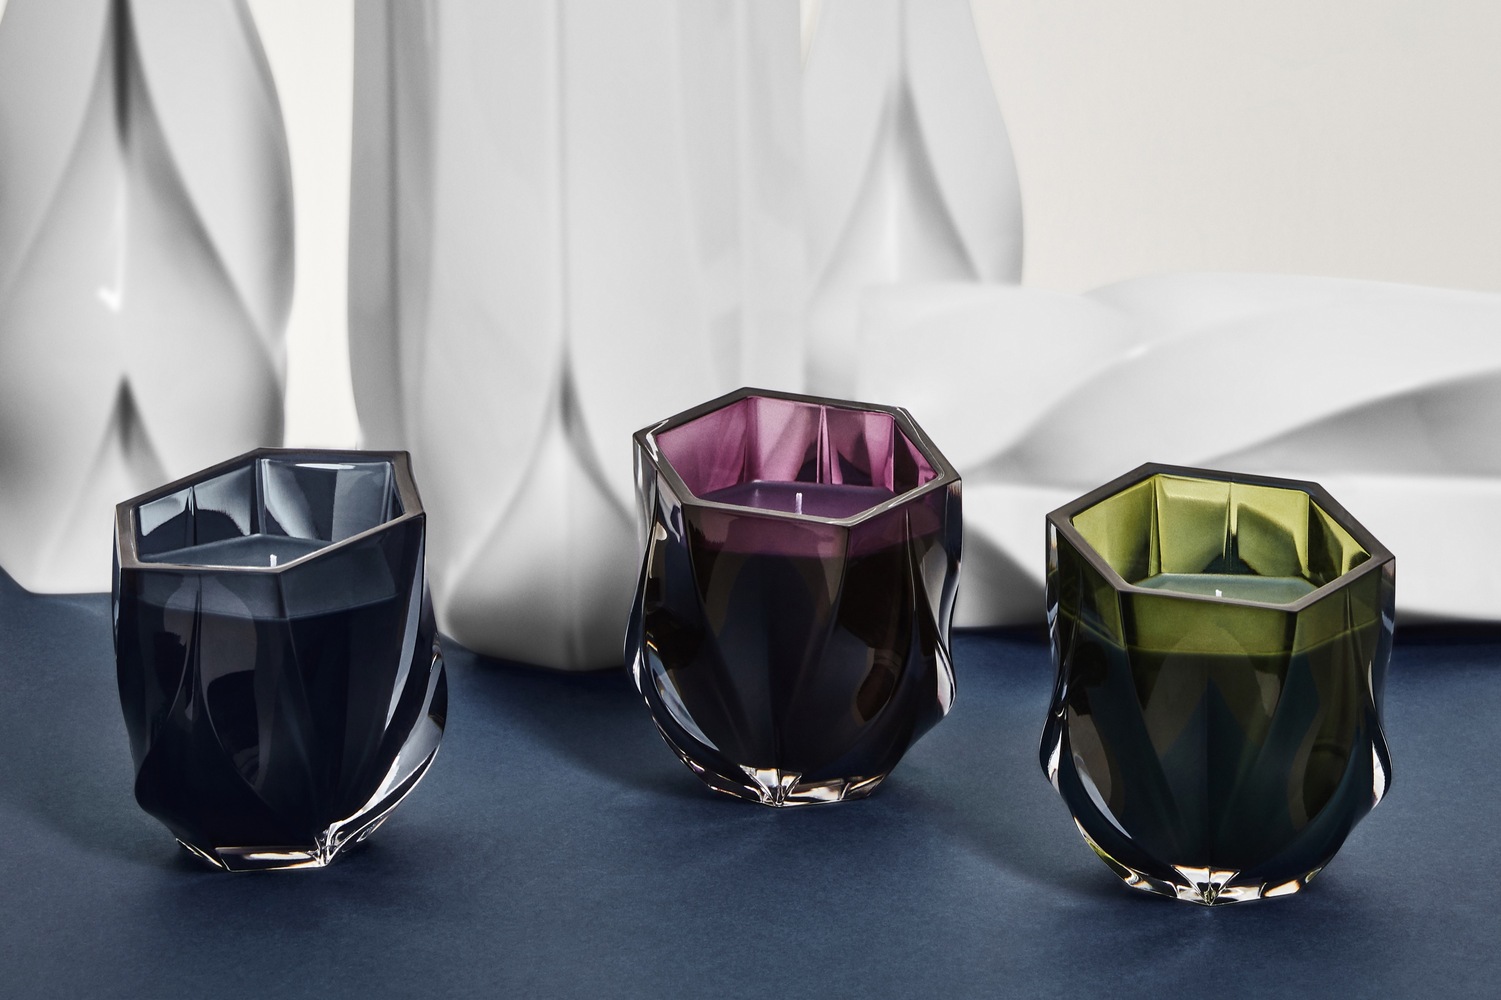 Candle holders featured in Zaha Hadid Design's new kitchenware collection.